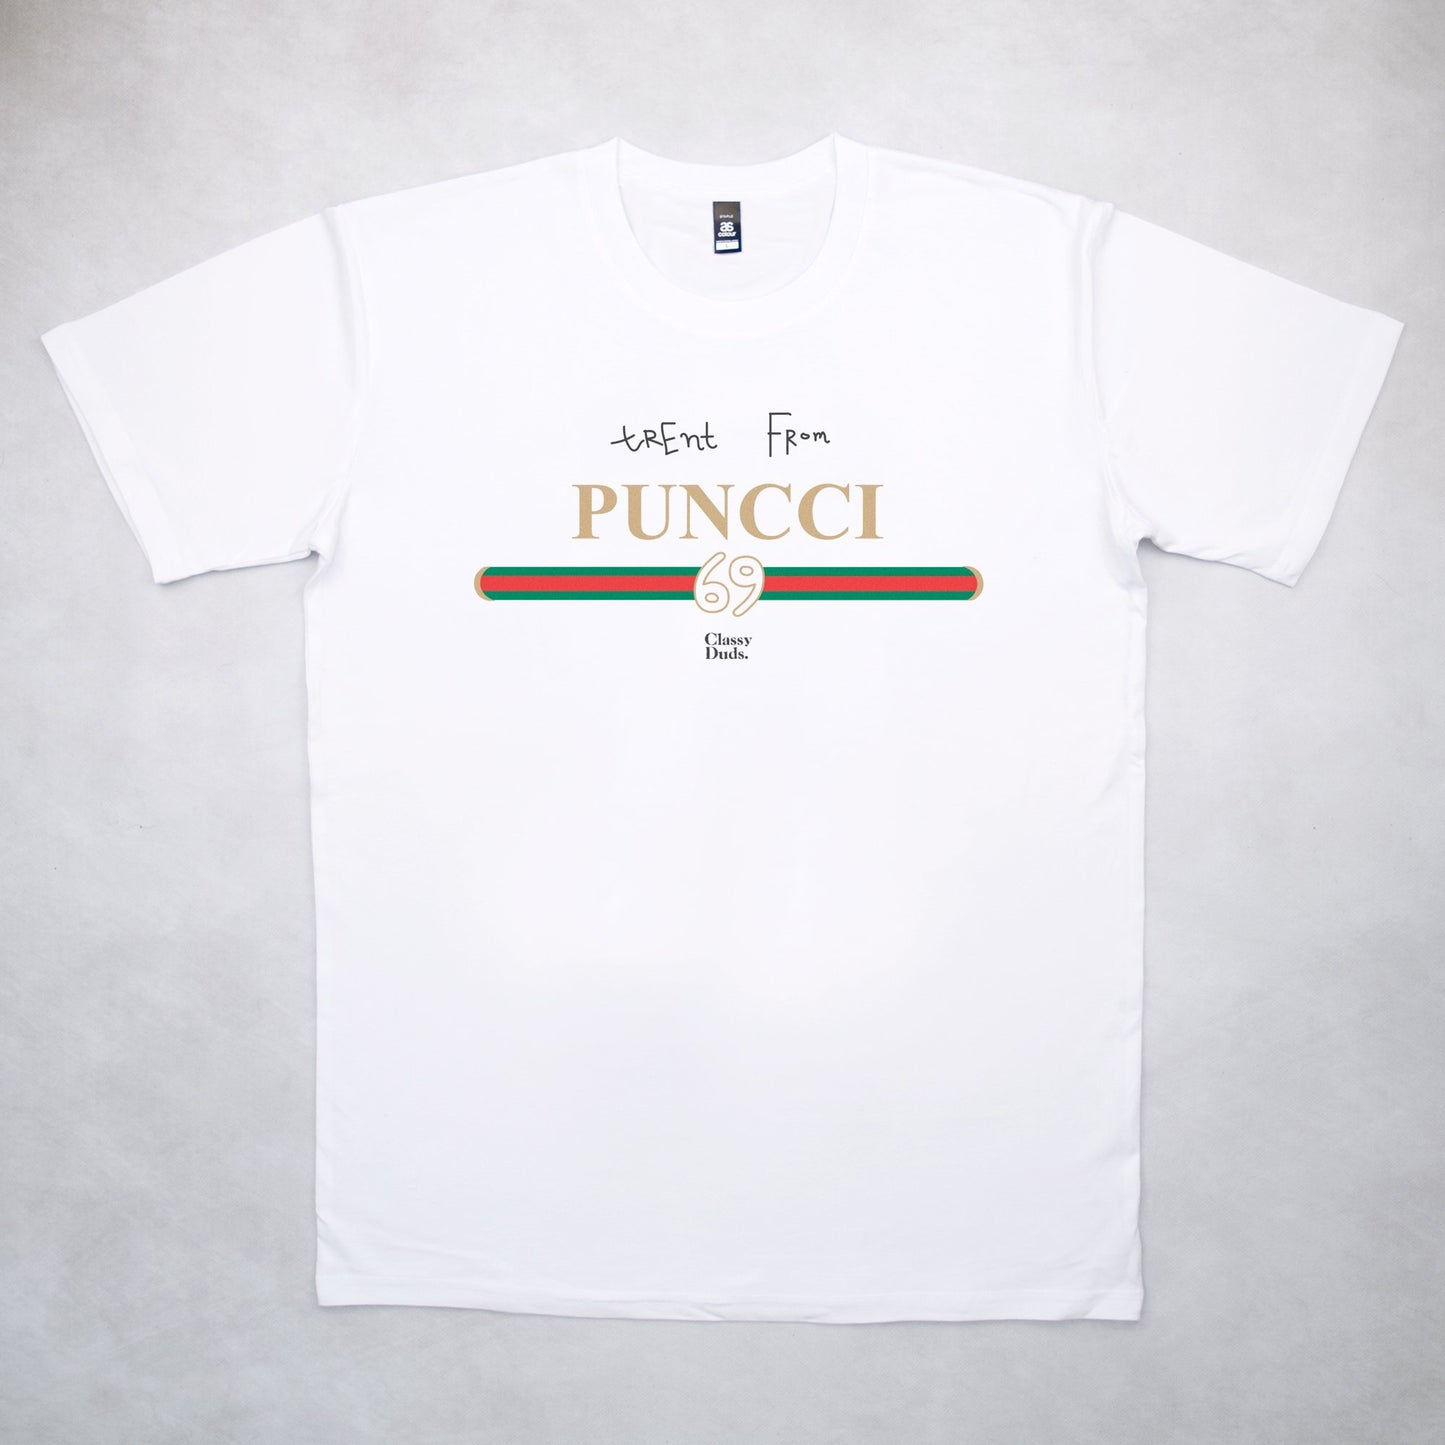 Classy Duds Short Sleeve T-Shirts Trent From Puncci Tee